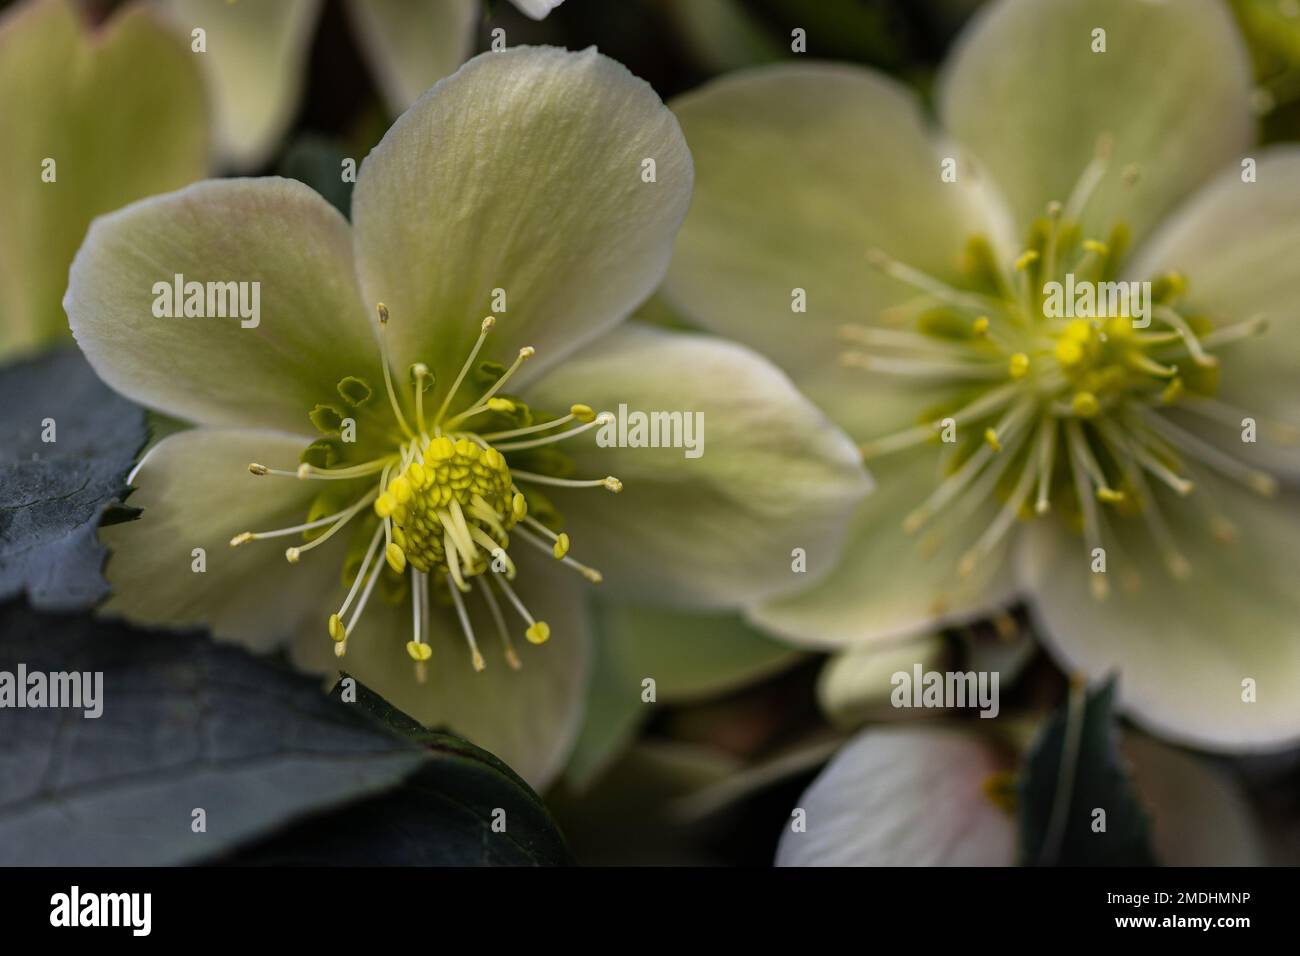 Close-up of a white and green Christmas rose (Helleborus niger) in bright light Stock Photo